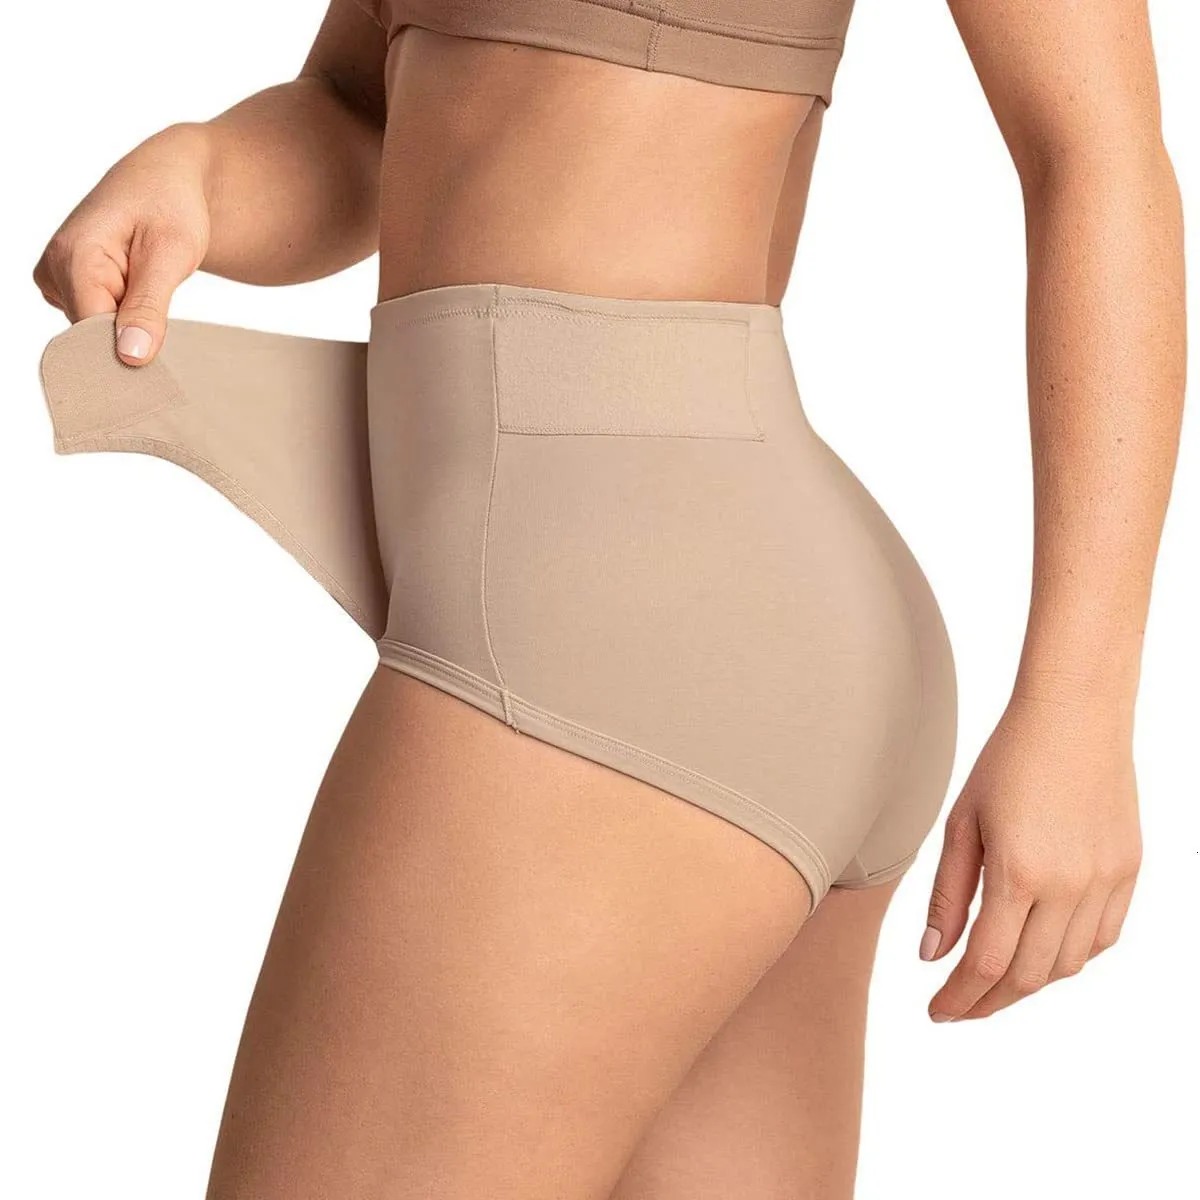 Postpartum Underwear Control Belly Wrap For Women High Waist Shapewear Panty  With Csection Fupa Panties 230904 From Pang04, $27.74